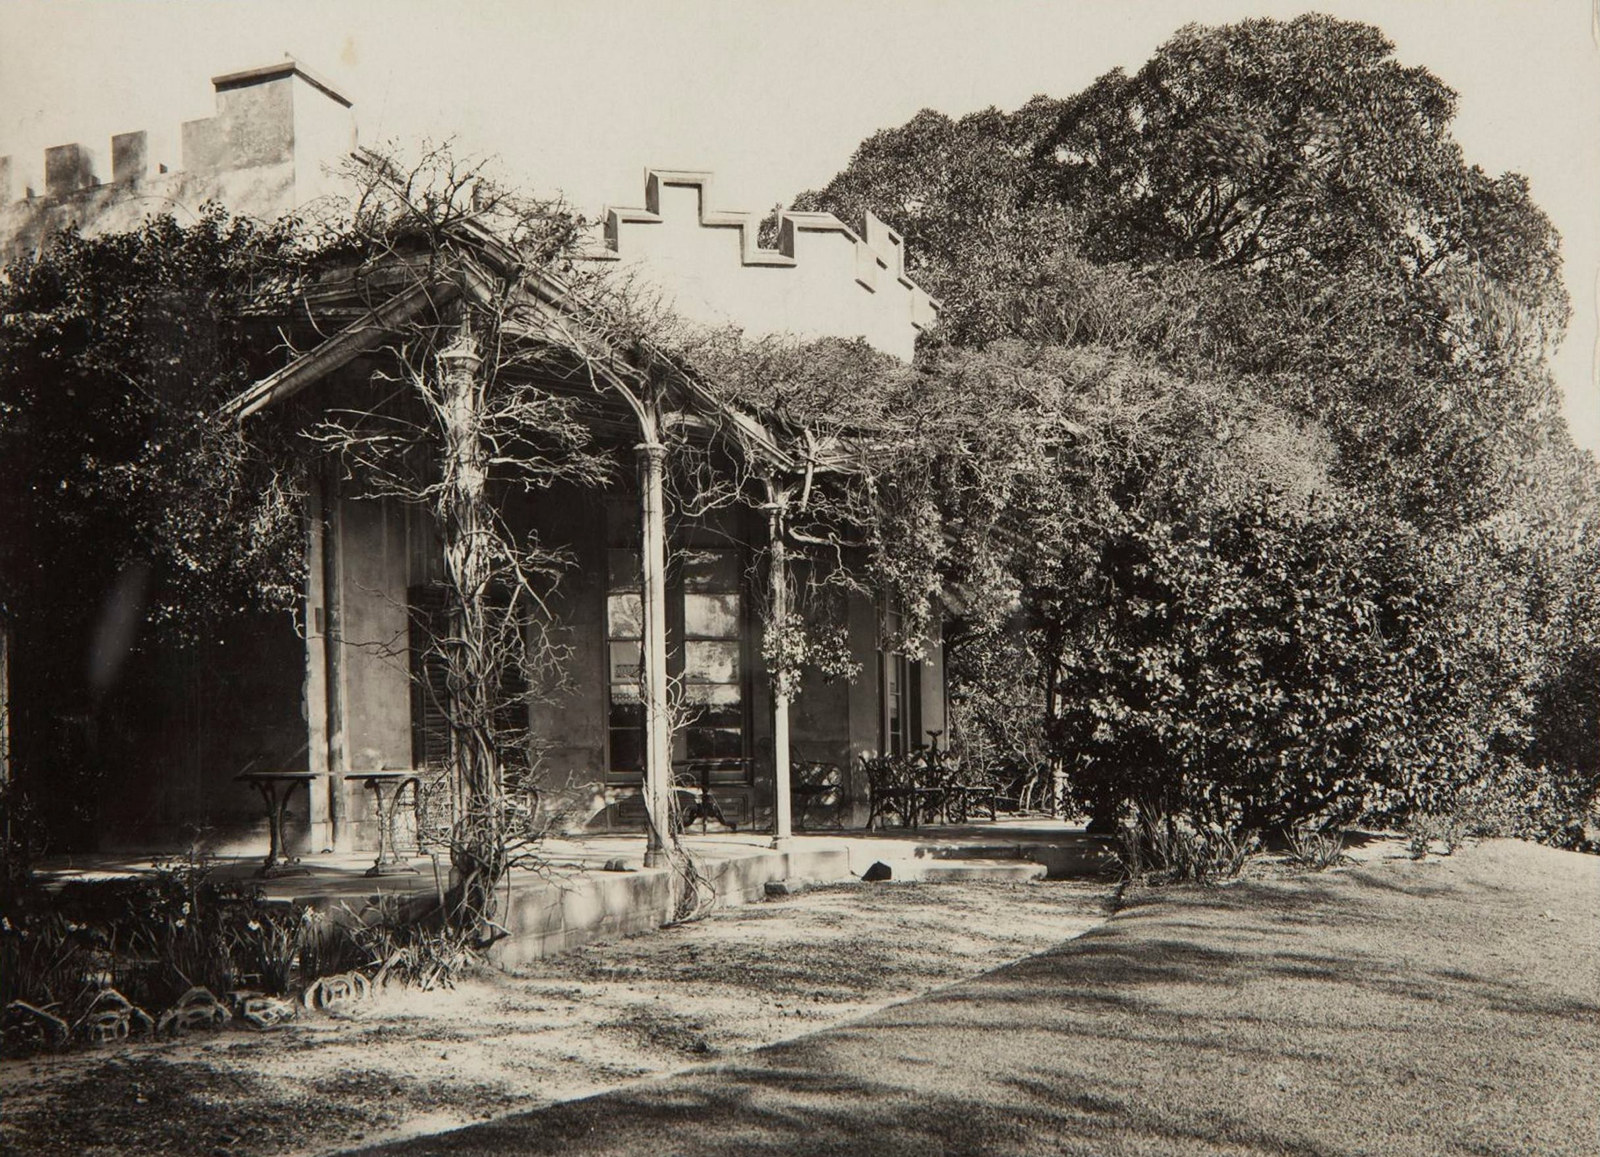 The front verandah at Vaucluse House